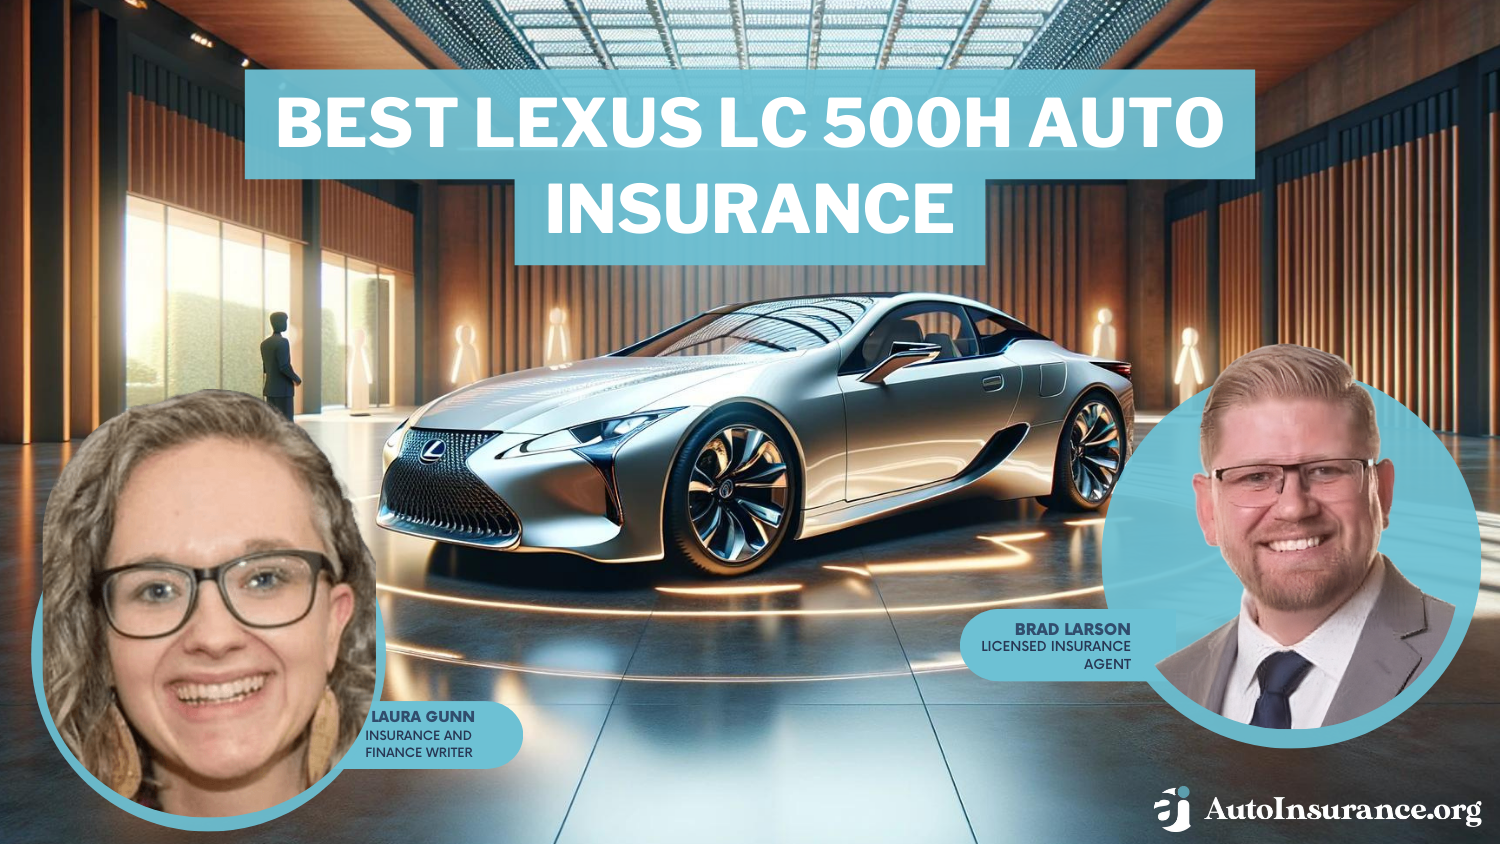 Best Lexus LC 500h Auto Insurance: State Farm, Allstate, and AAA